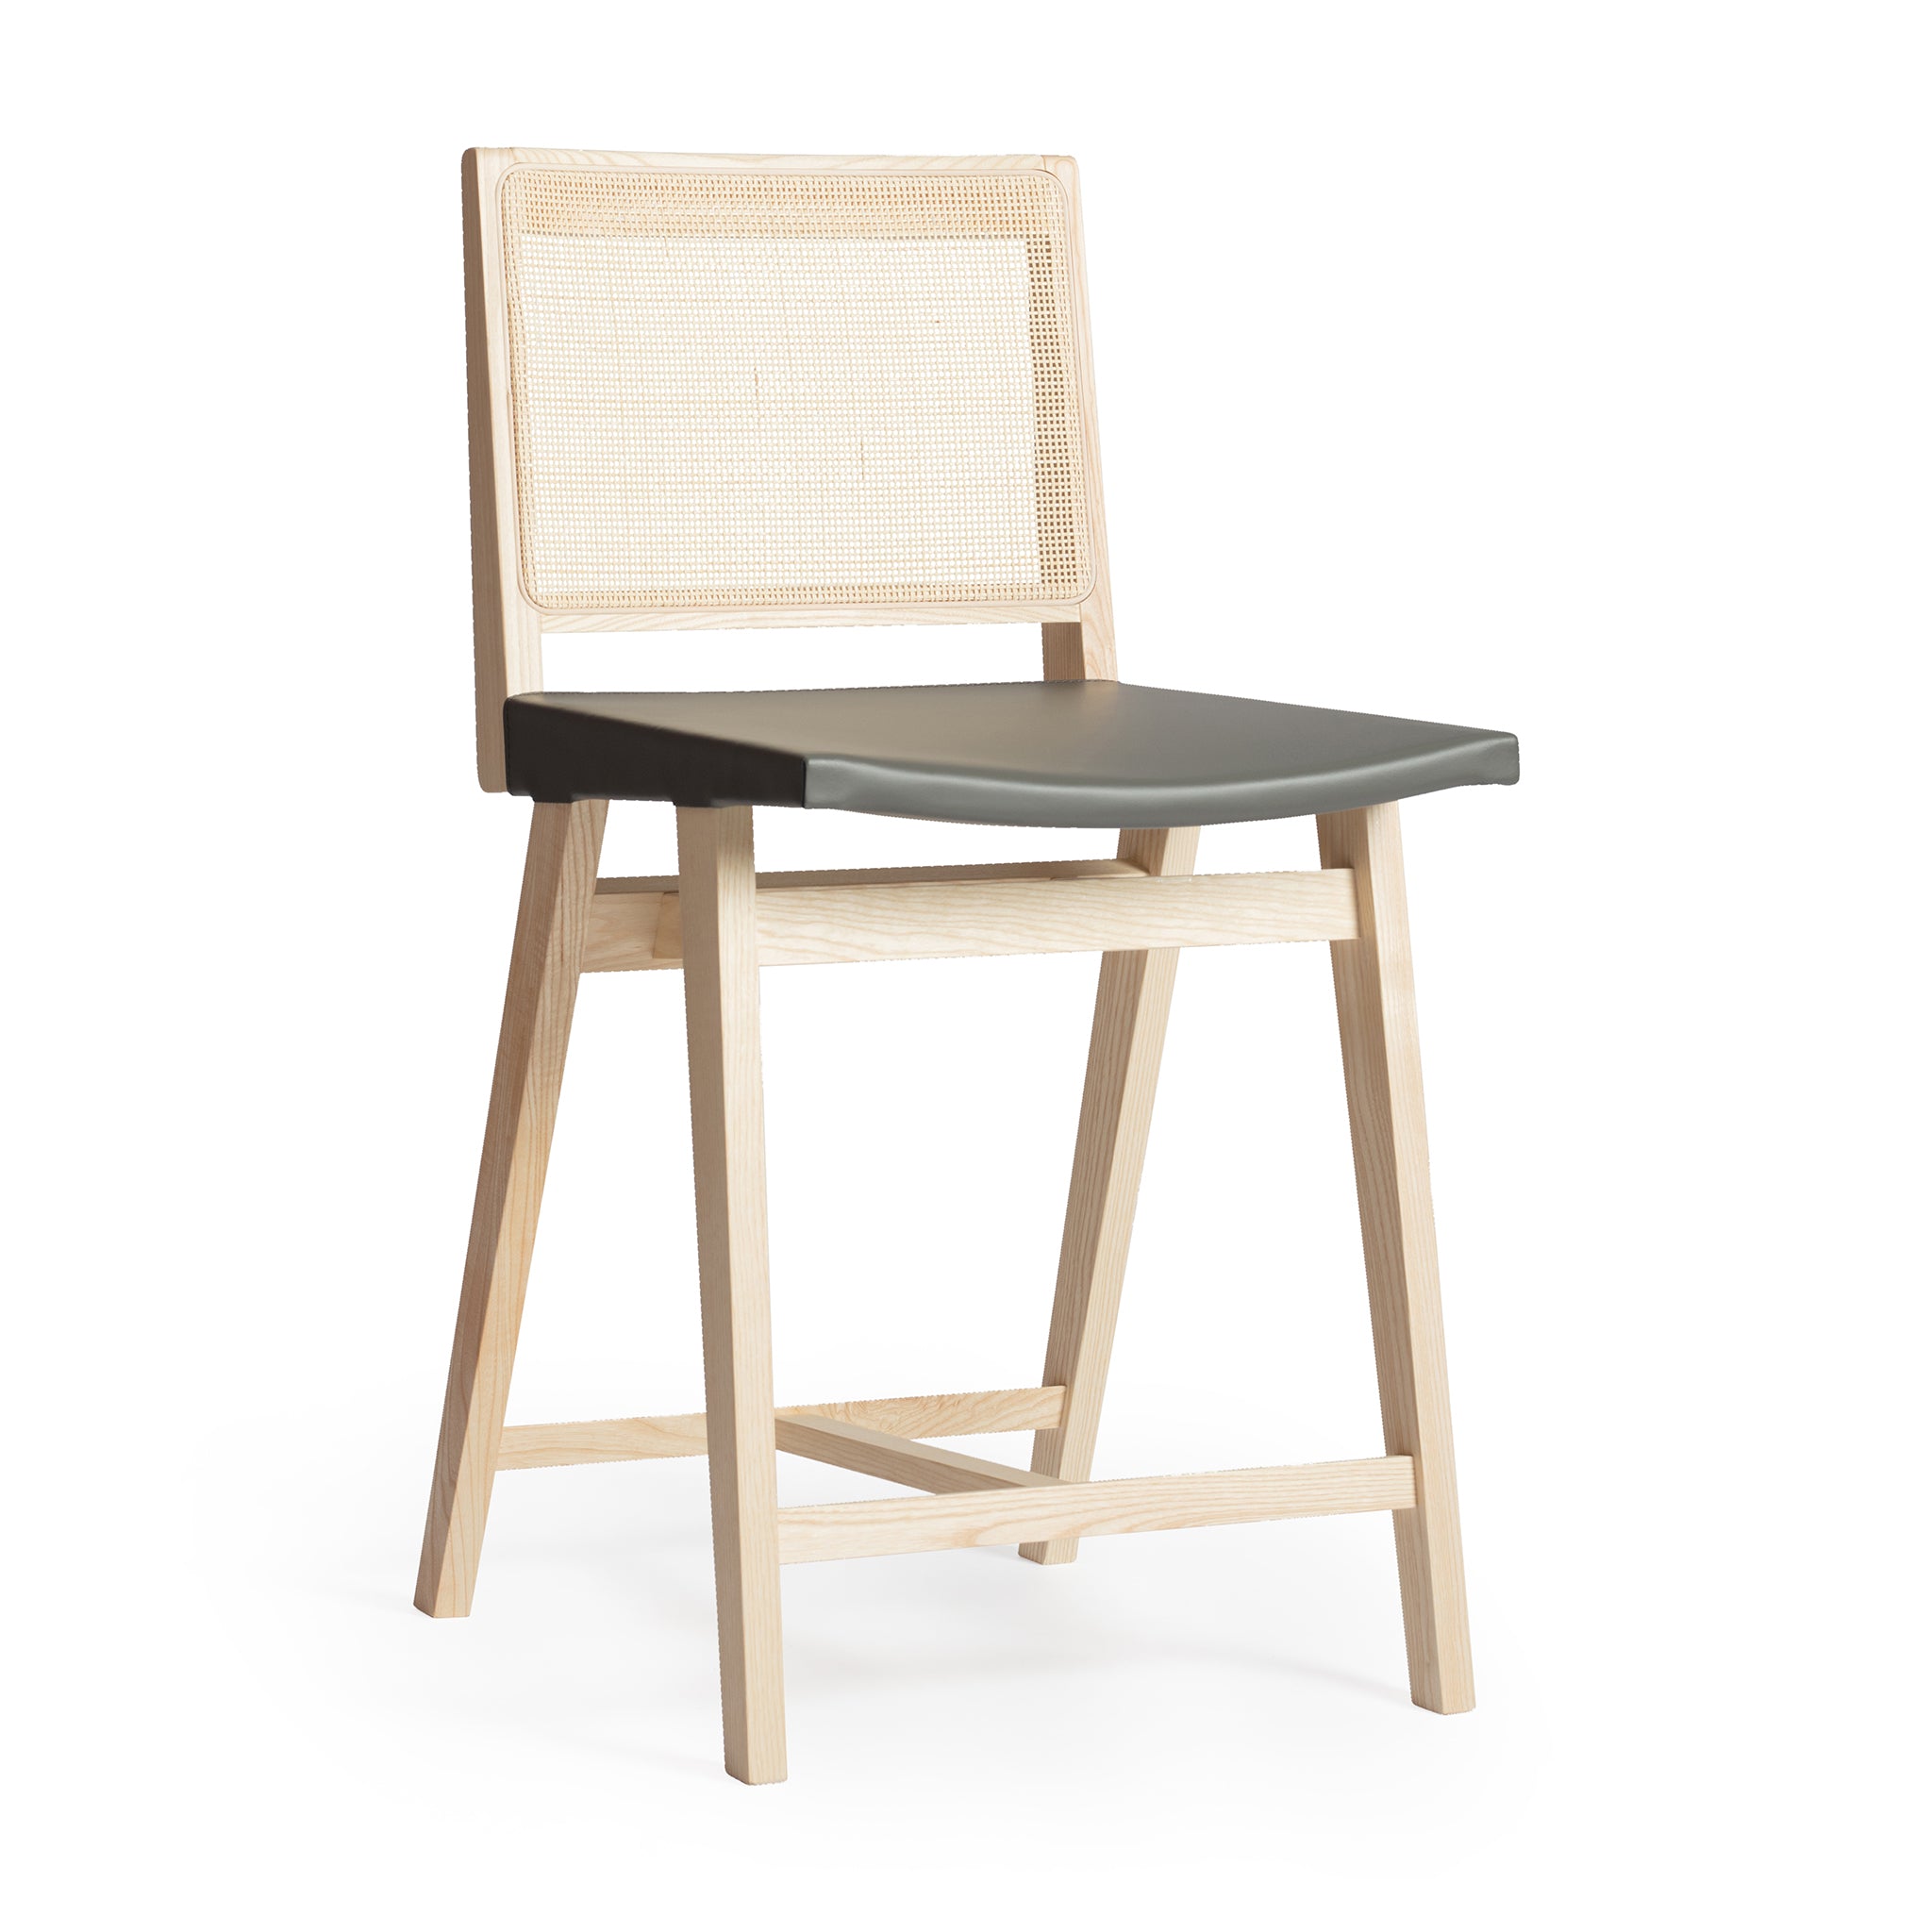 Main view of an Elye modern kitchen counter stool, natural ash frame, square weave cane back, contract grade gray leather seat, produced by Klarel in Italy. #K43-3